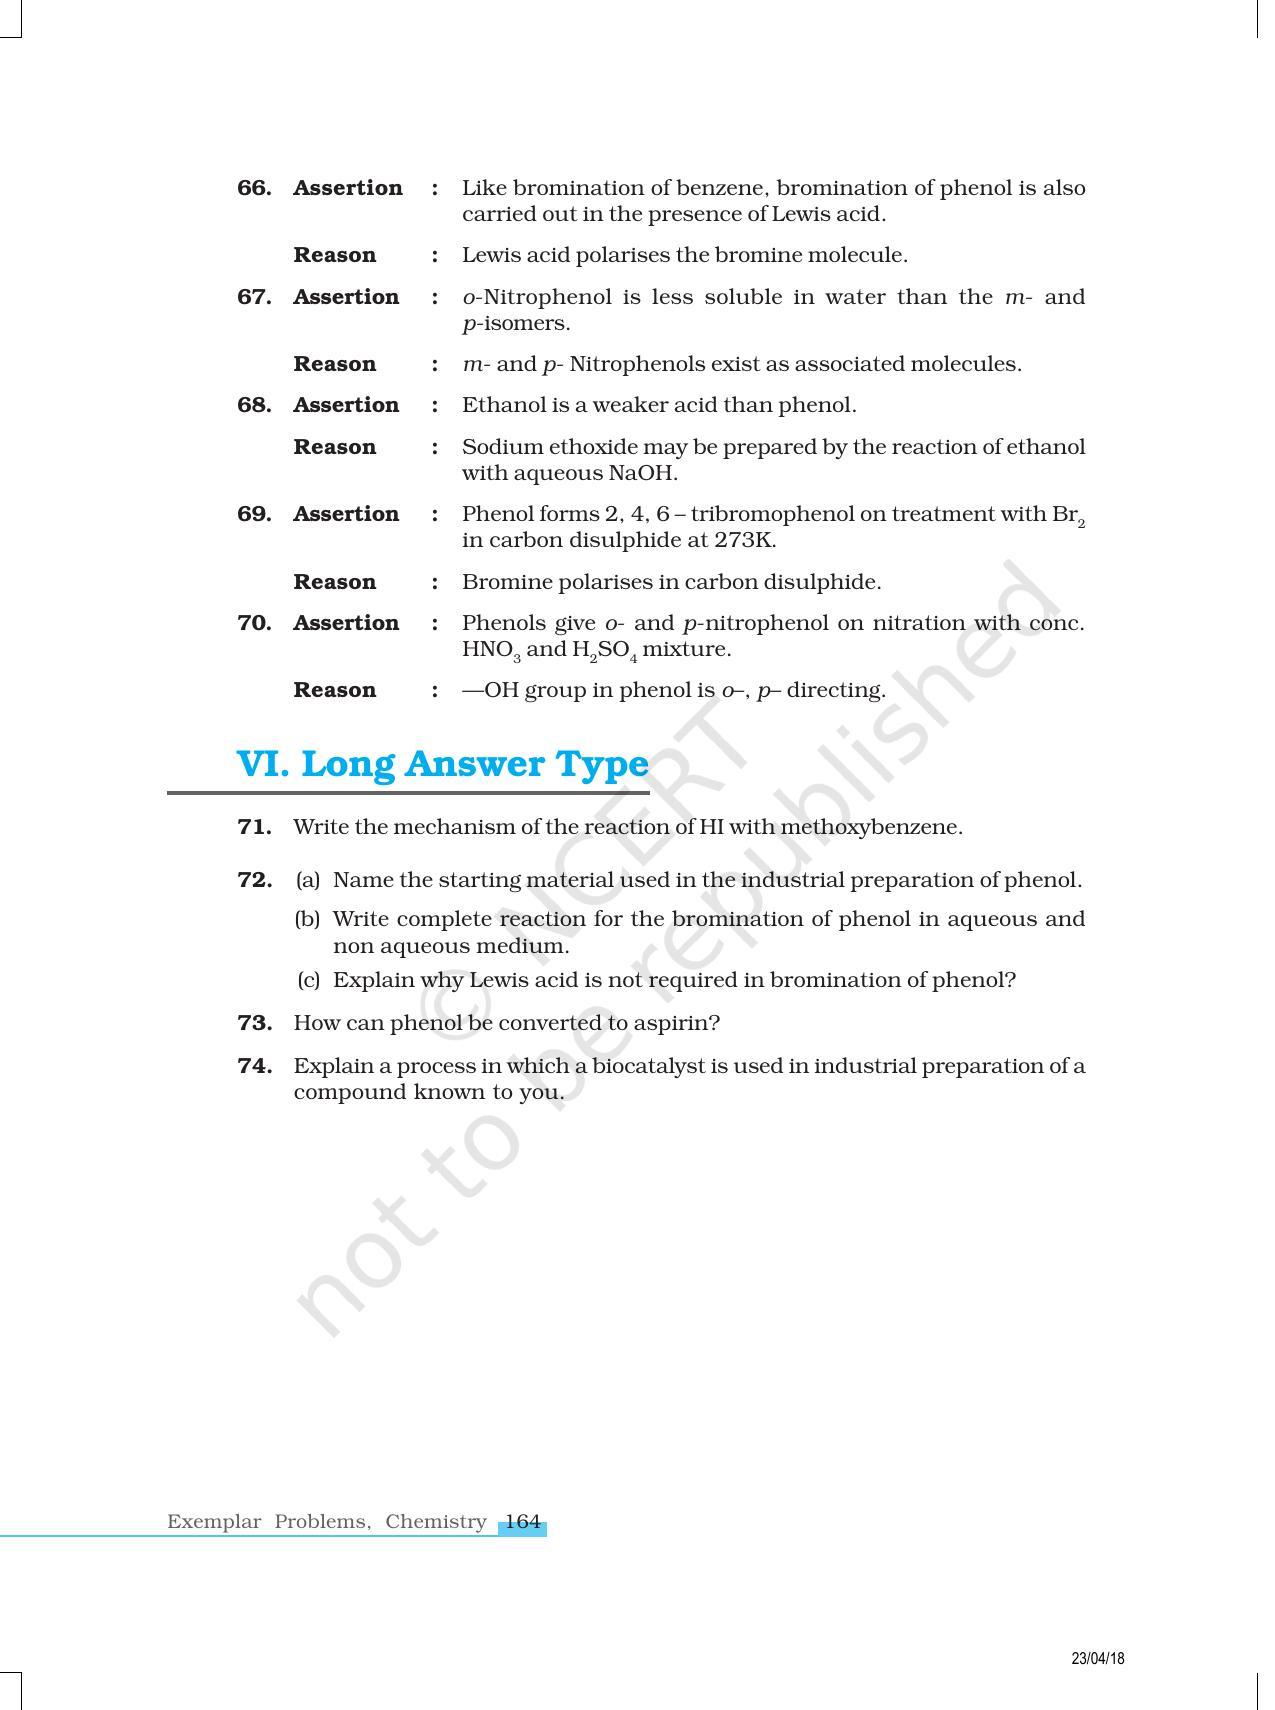 NCERT Exemplar Book for Class 12 Chemistry: Chapter 11 Alcohols, Phenols and Ethers - Page 11